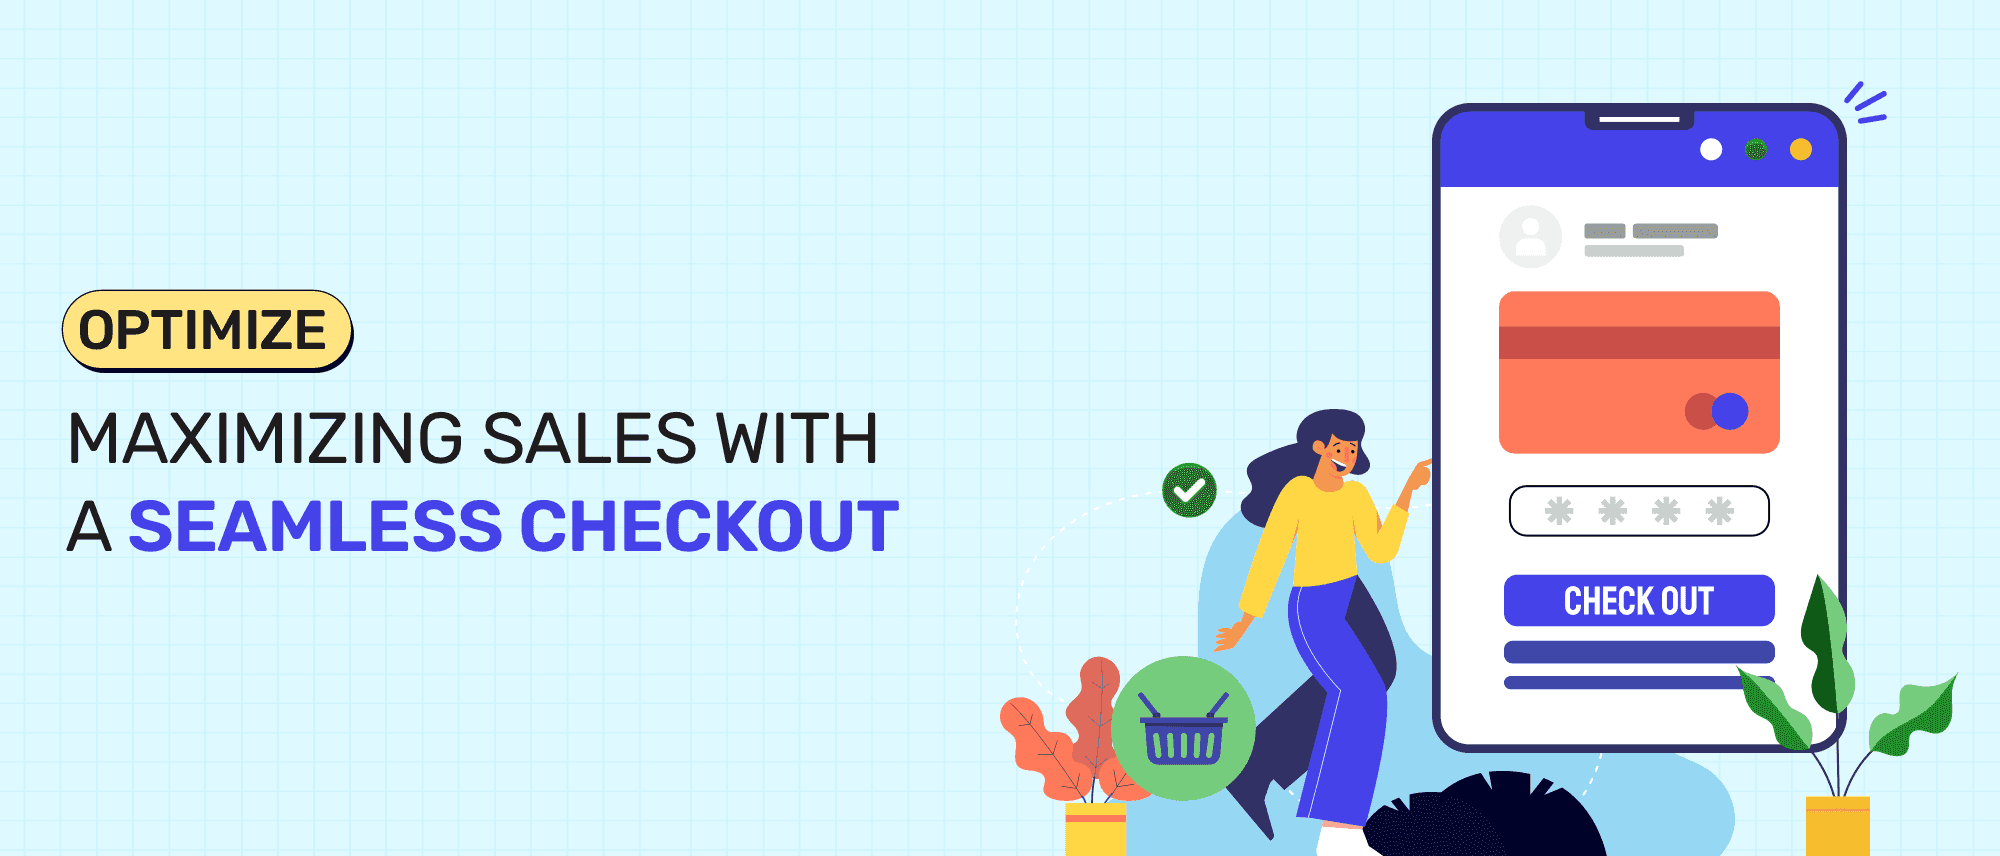 best-practices-to-reduce-checkout-abandonment